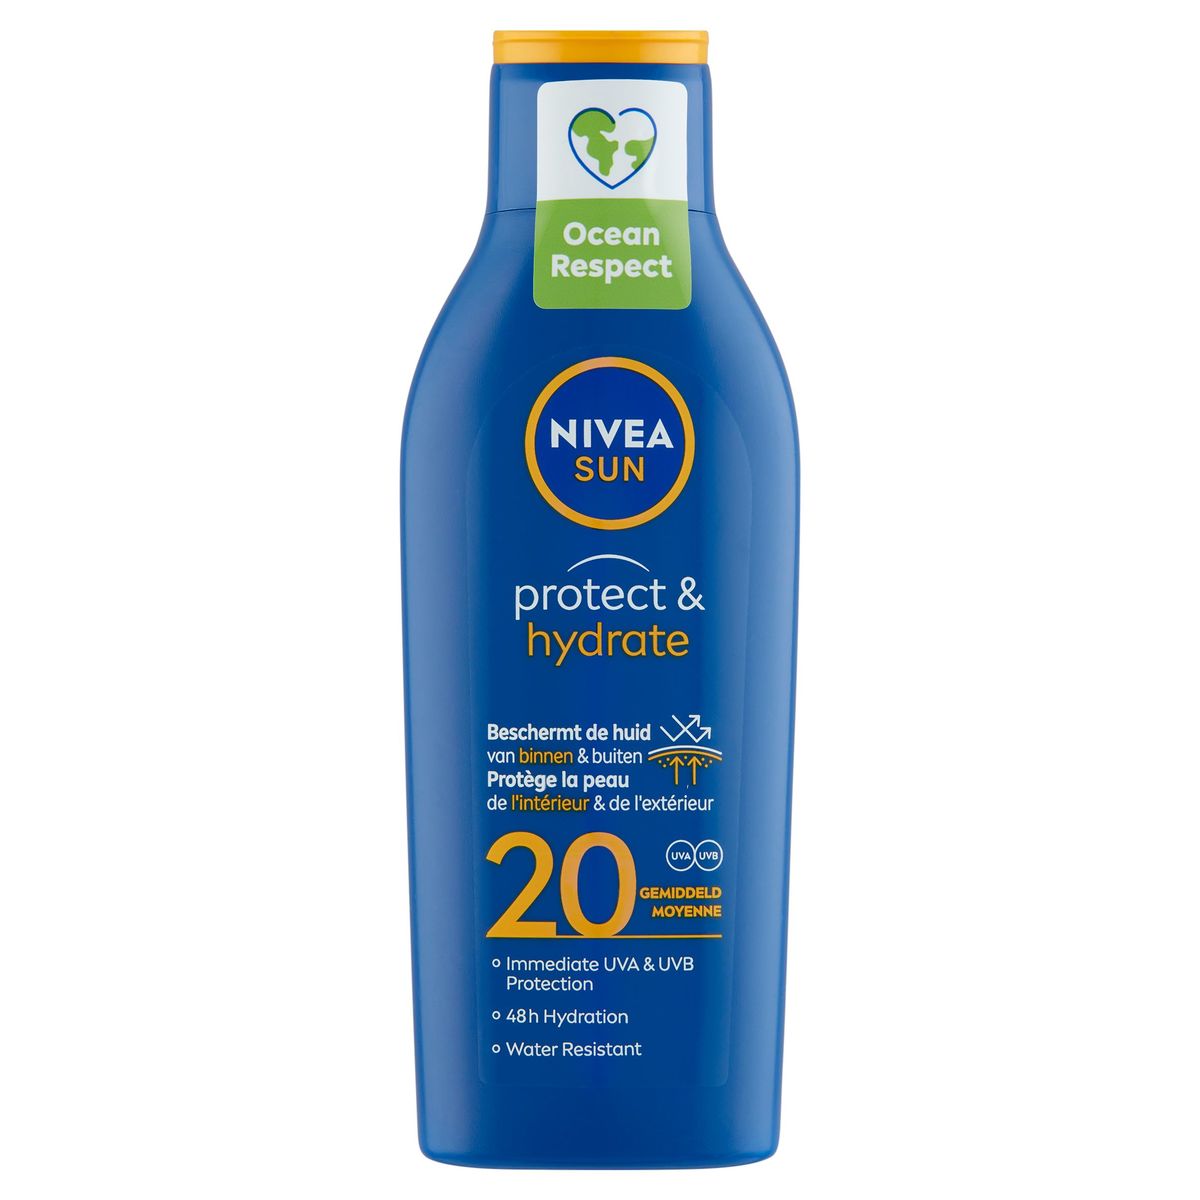 Nivea Sun Protect & Hydrate Protection Solaire 20 Moyenne 200 ml